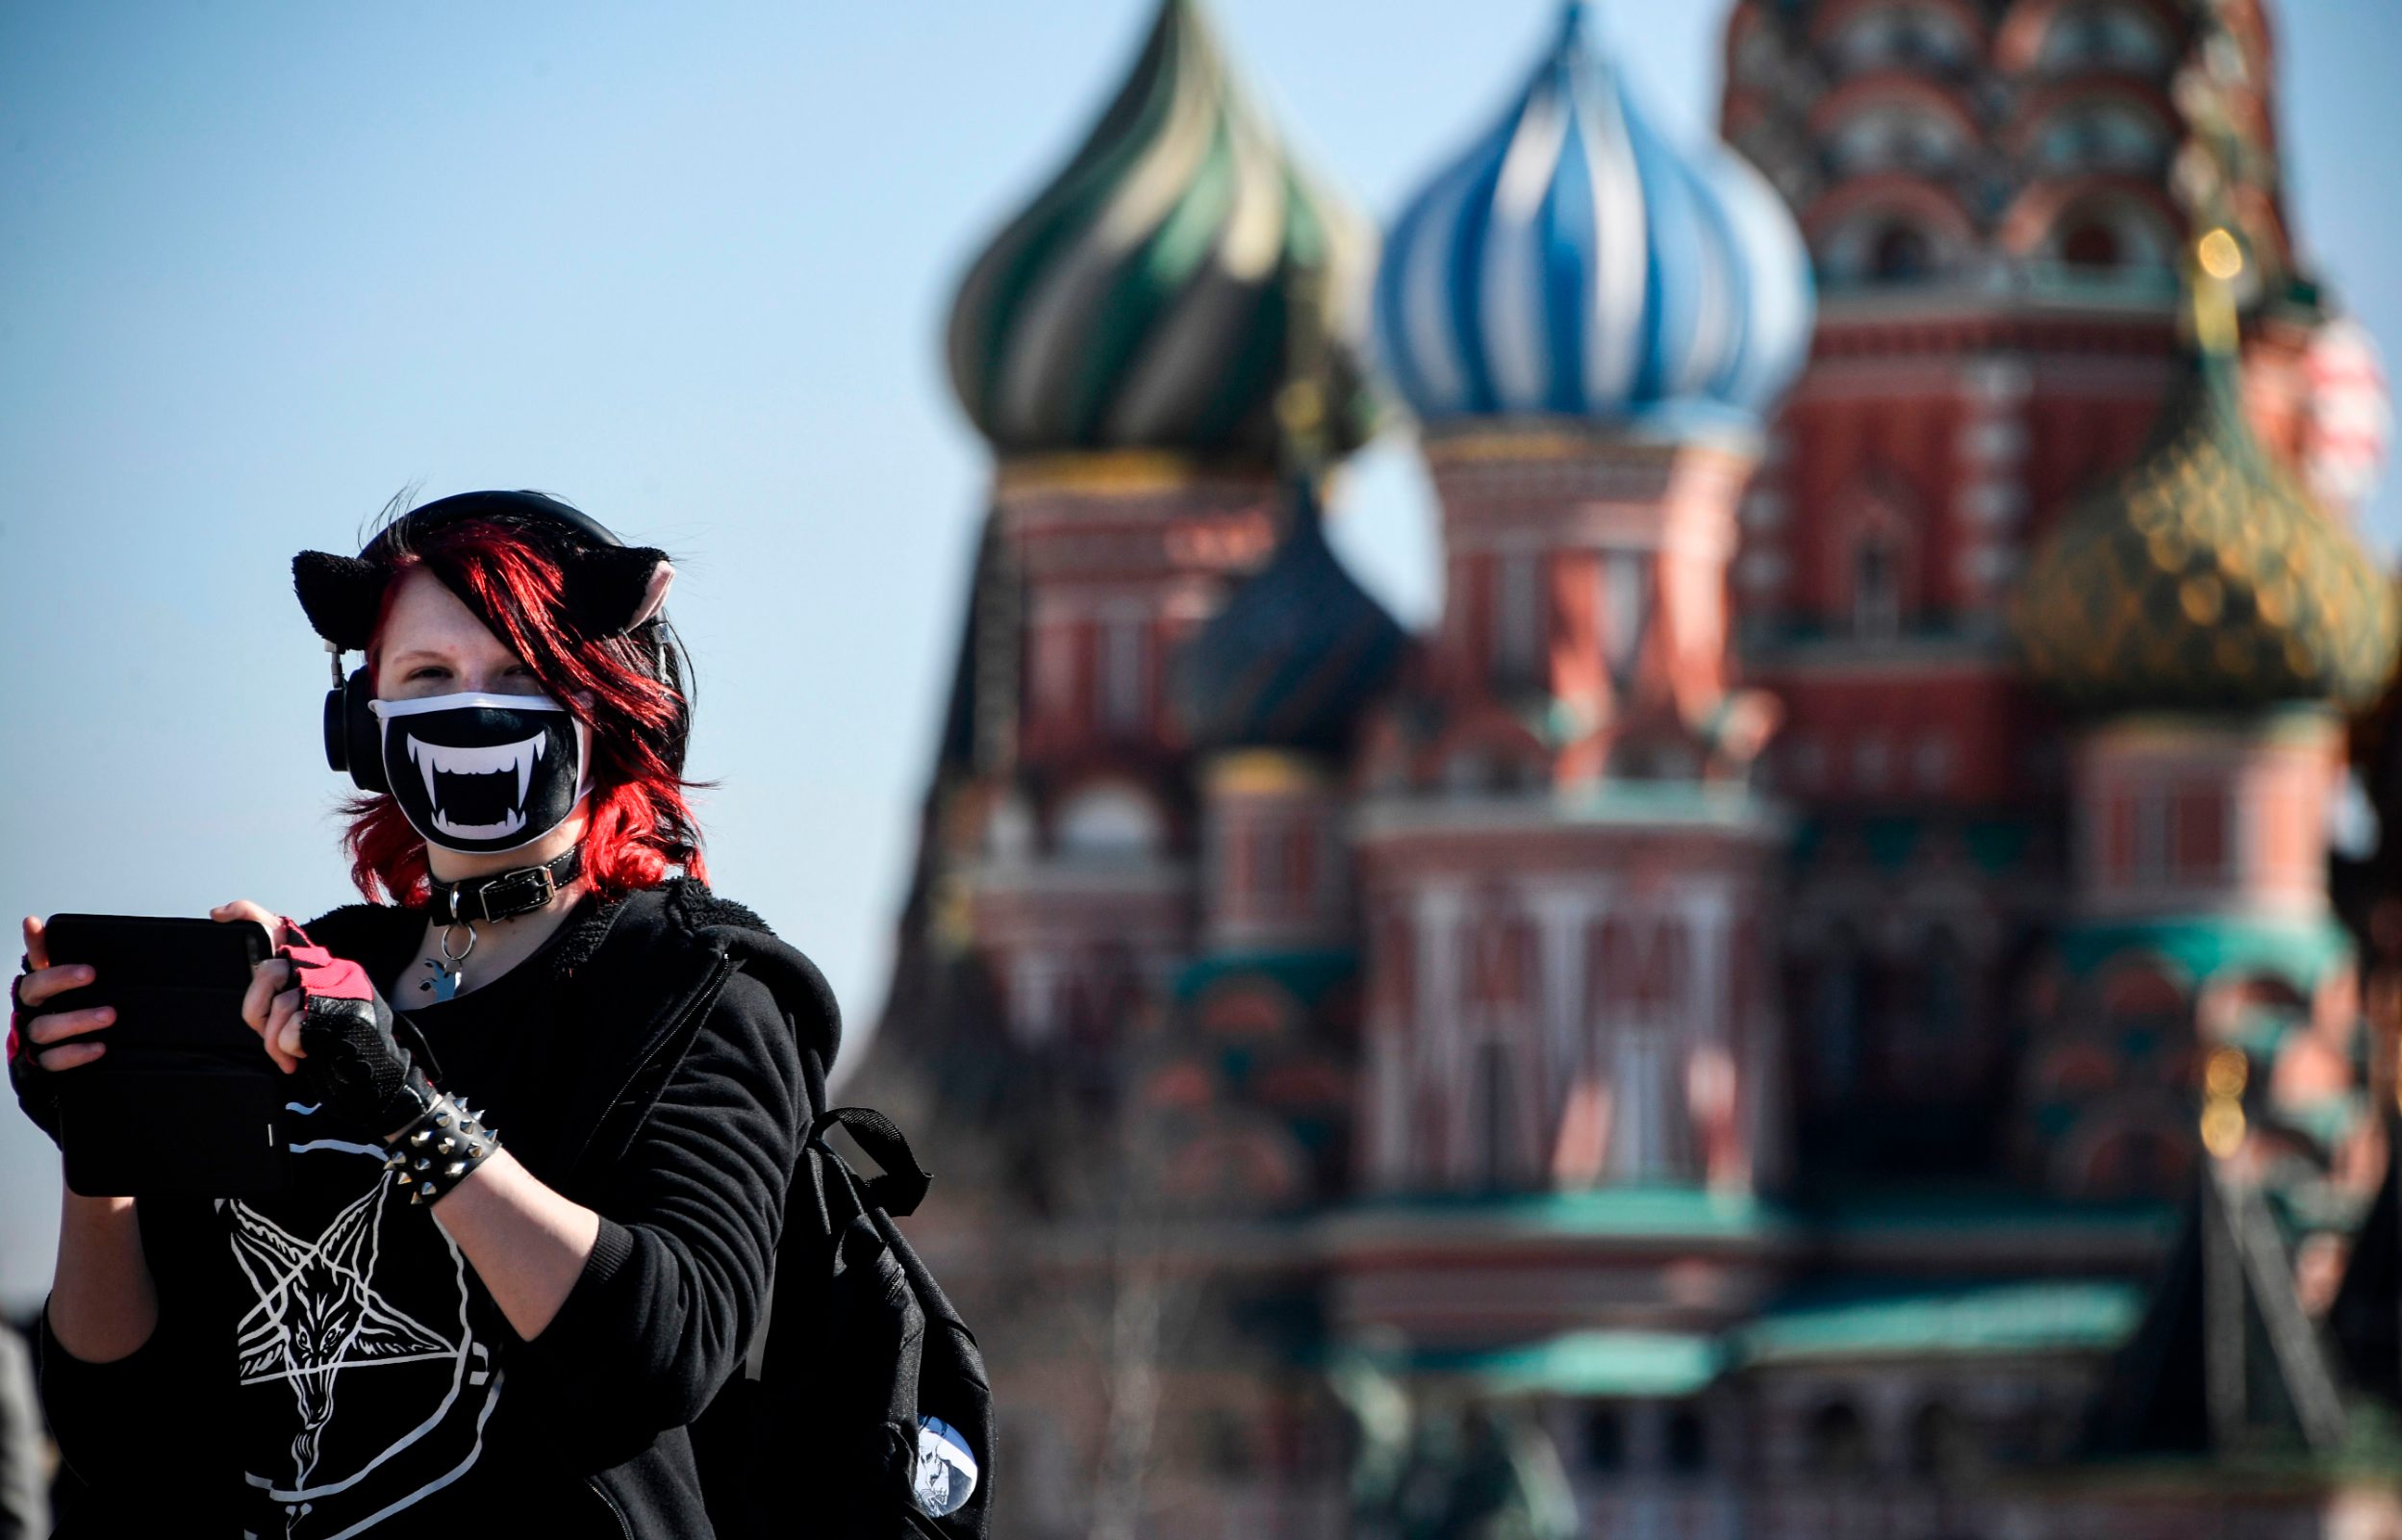 TOPSHOT - A young woman wearing a face mask, amid concerns over the spread of the COVID-19 coronavirus, walks on Red Square in front of St. Basil's Cathedral in downtown Moscow on March 25, 2020. (Photo by Alexander NEMENOV / AFP)